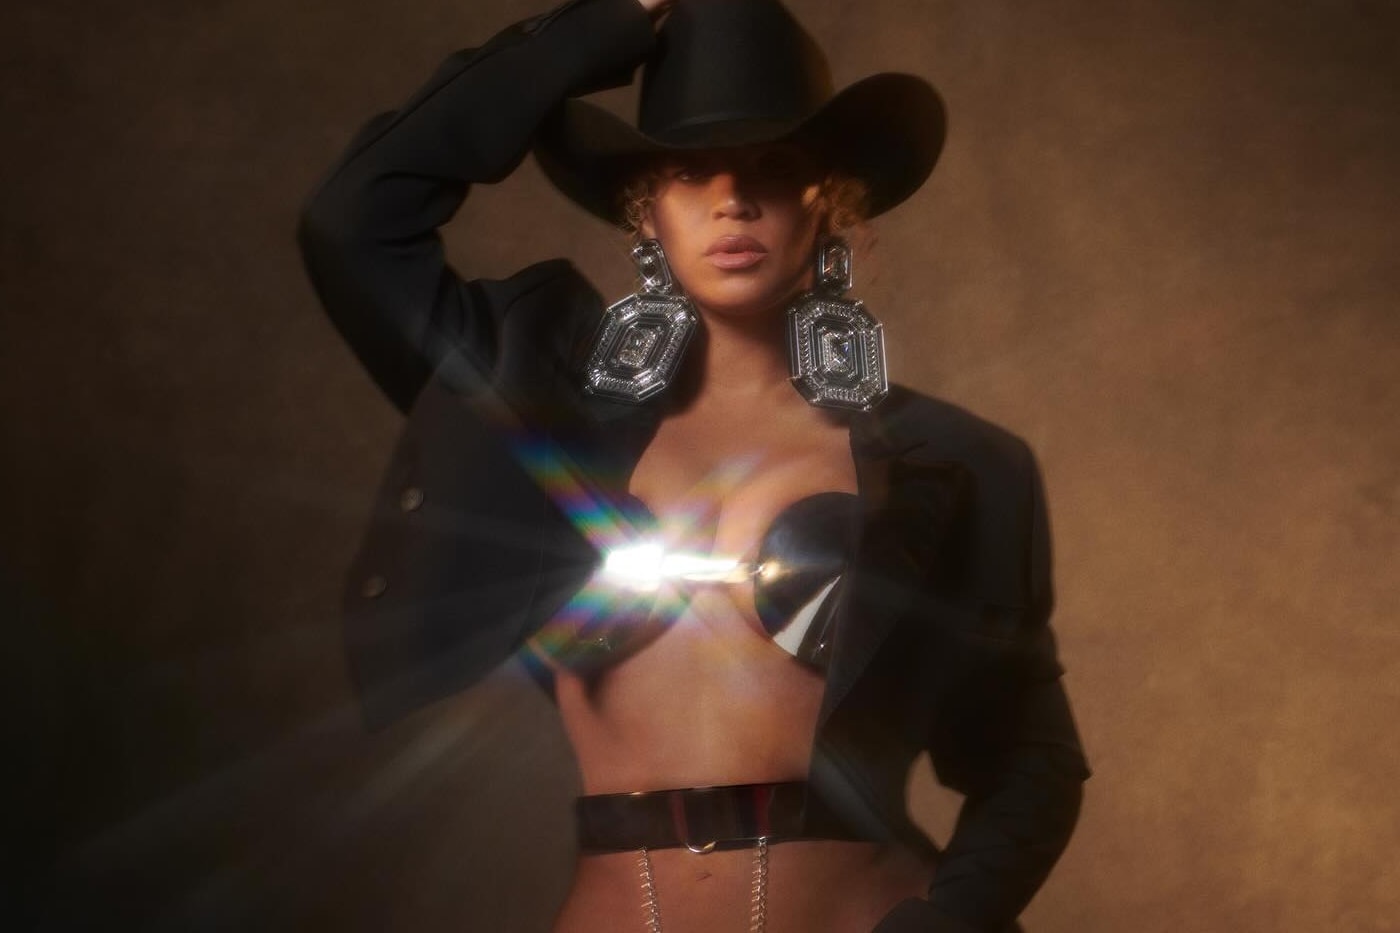 Beyoncé Texas Hold ‘Em No. 1 16 carriages no 9 Debut Billboard Hot Country Songs Chart